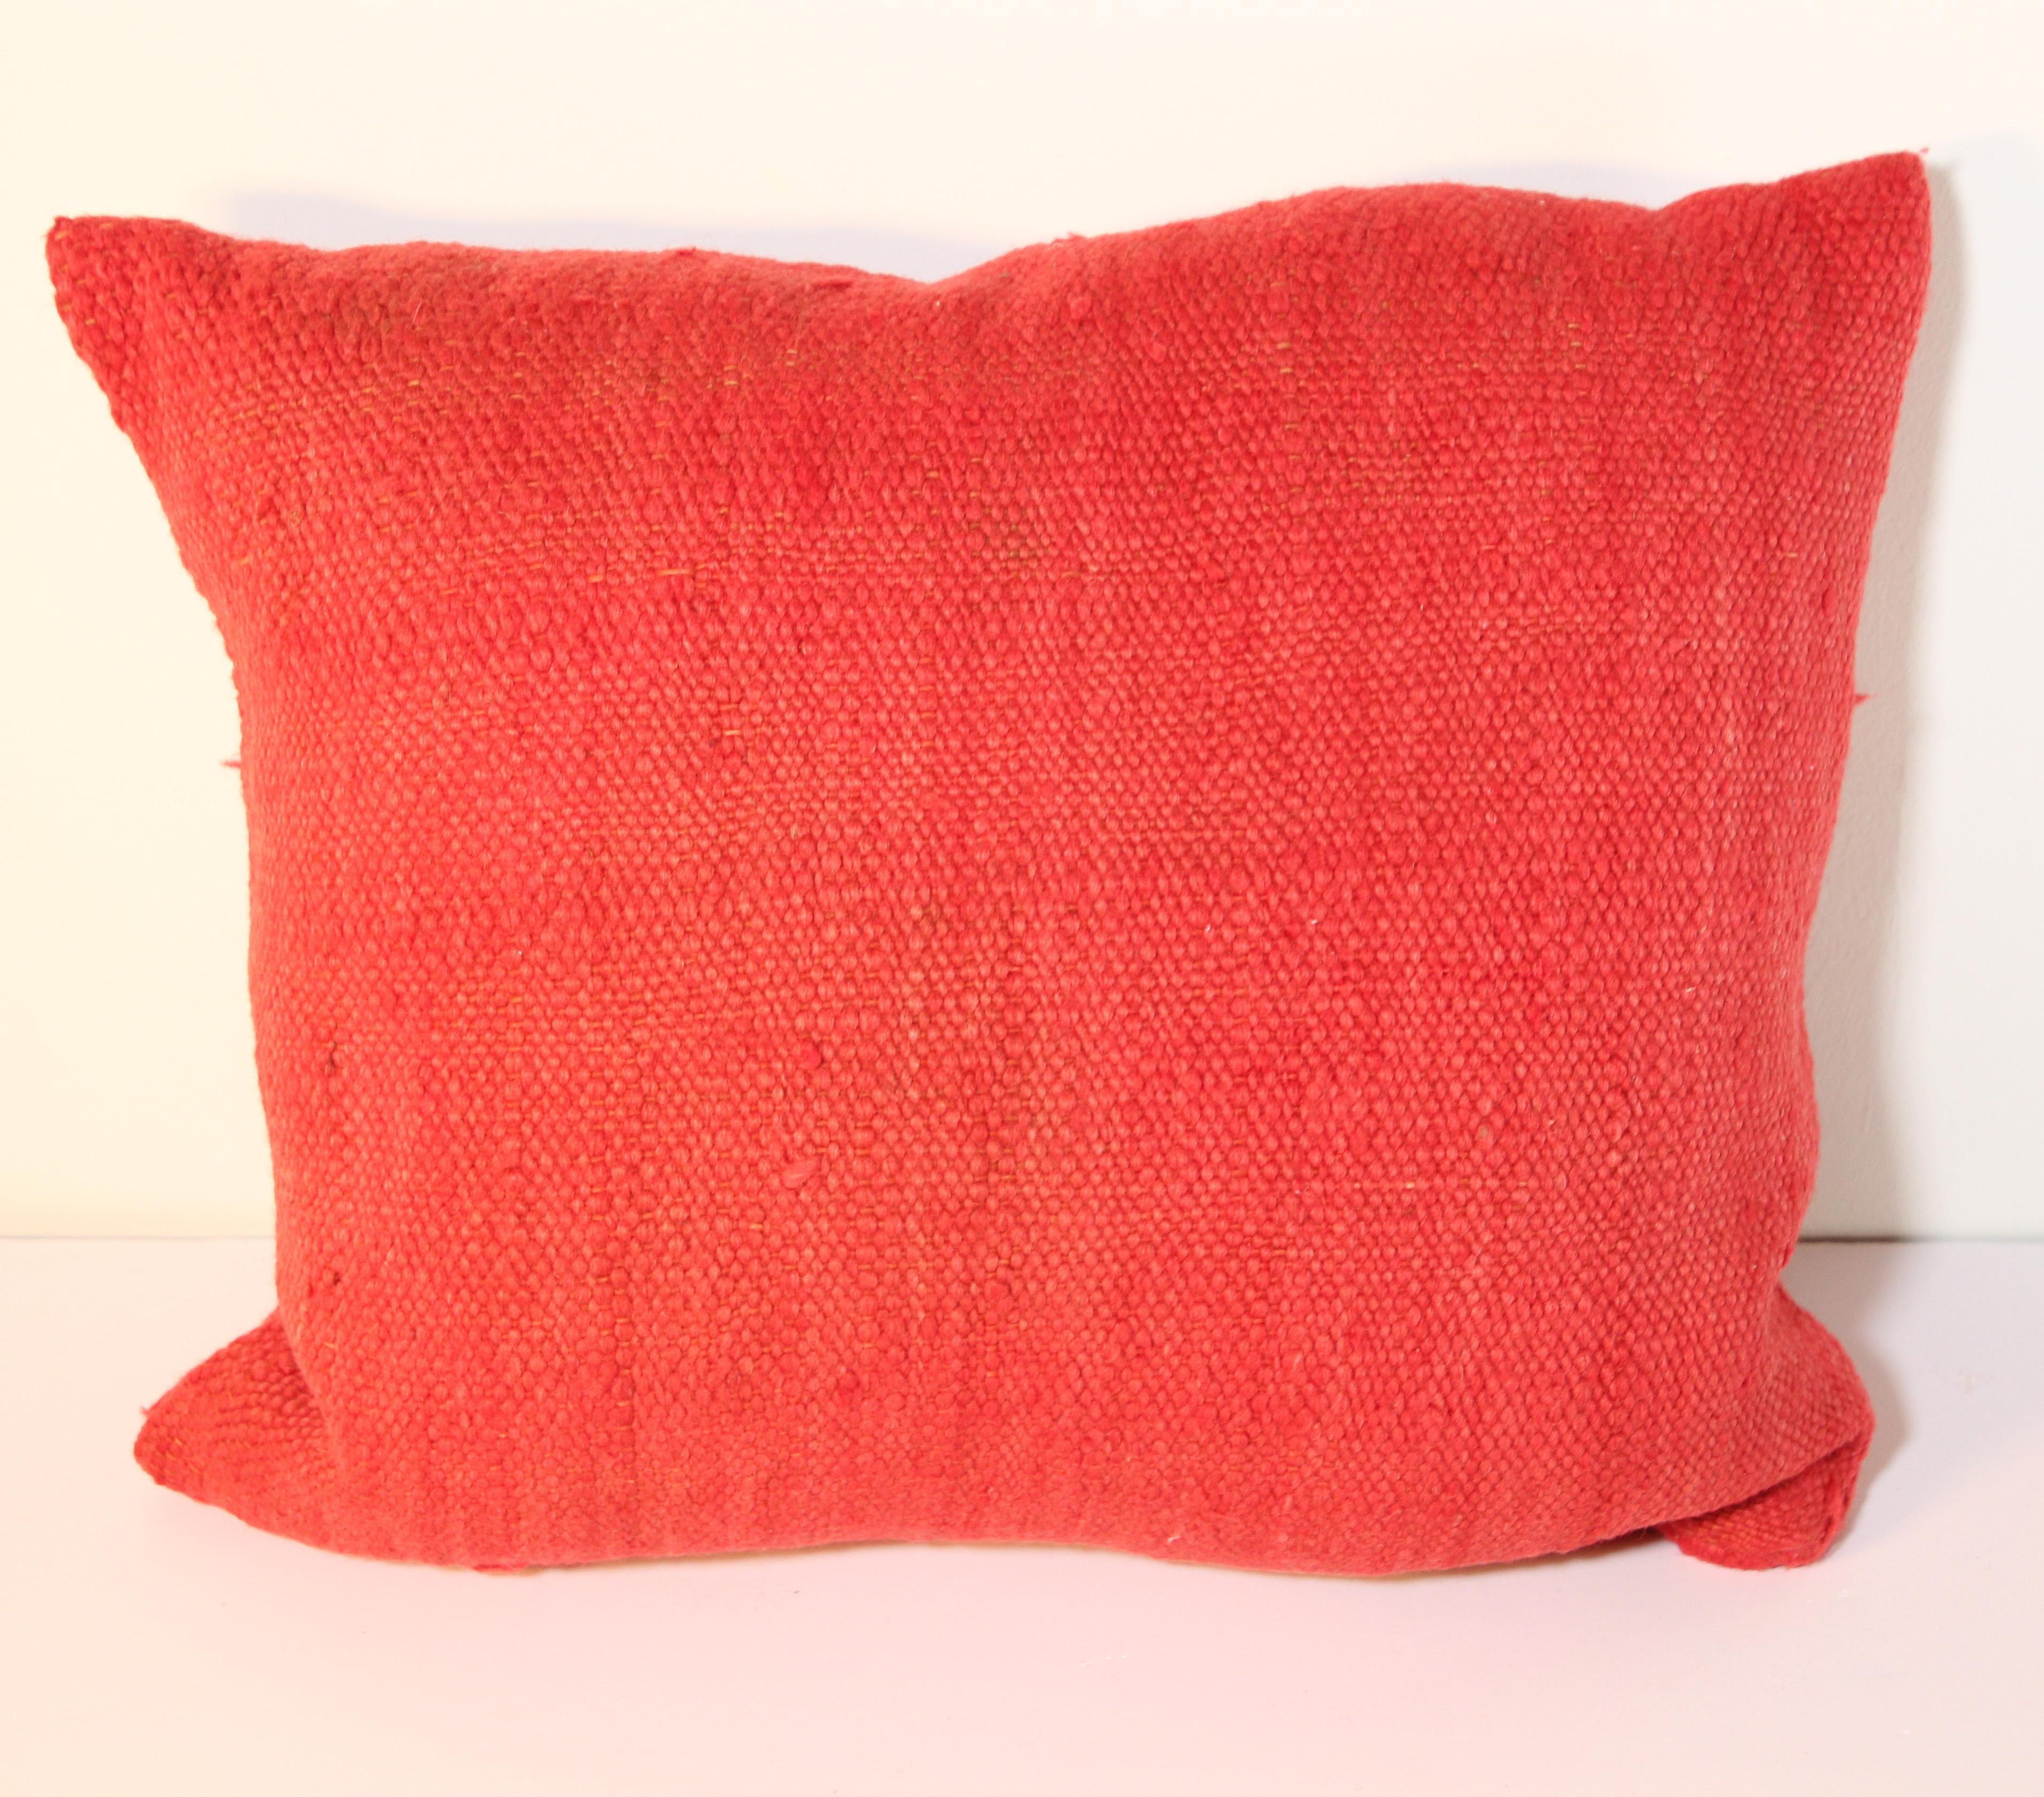 20th Century Moroccan Red Berber Pillow Cut from a Vintage Tribal Stripes Rug